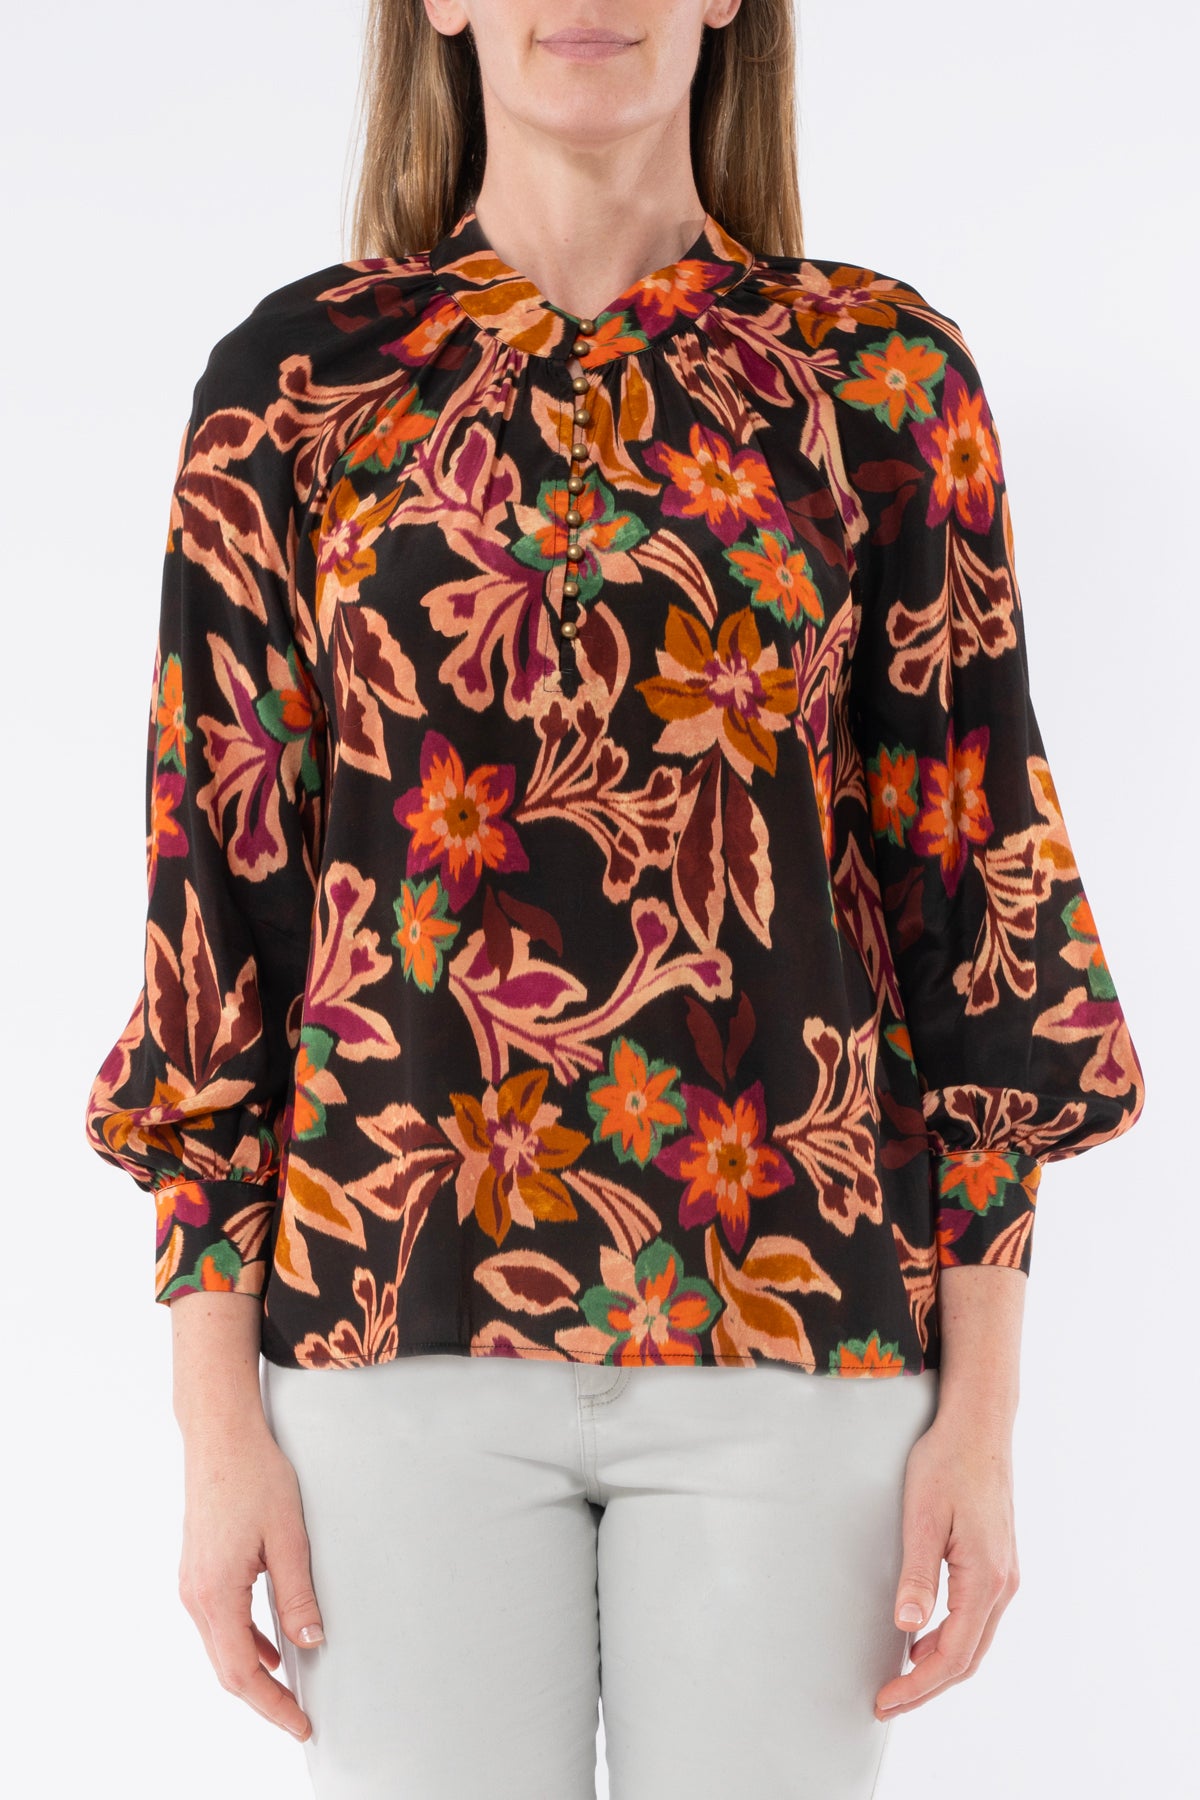 Jump Spice Floral Top